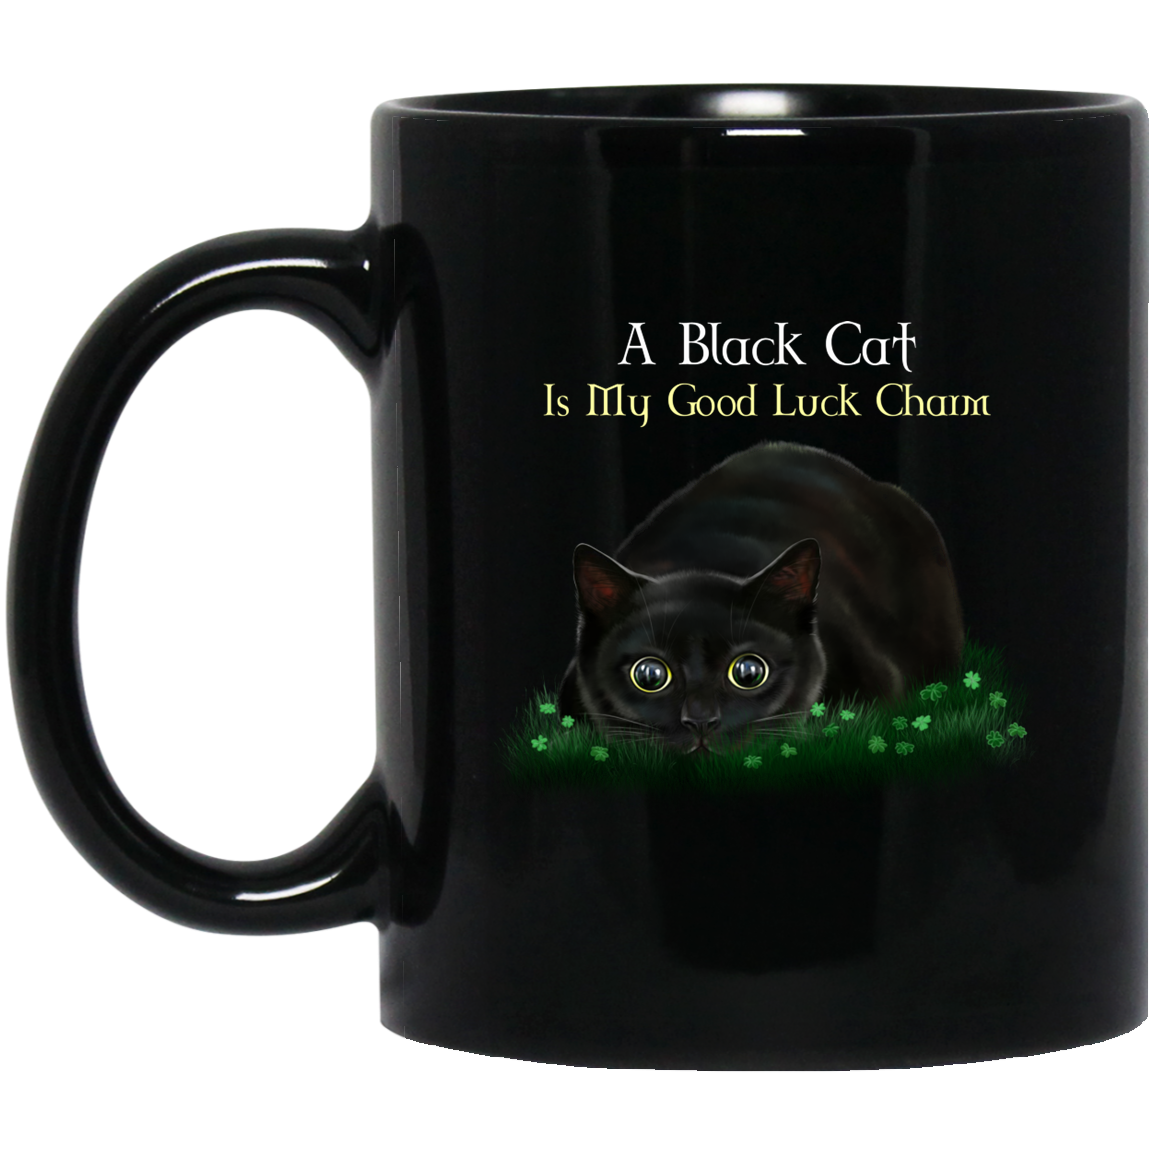 Cat Coffee Mug, Black Cat Gifts, A Black Cat Is My Good Luck Charm - GoneBold.gift